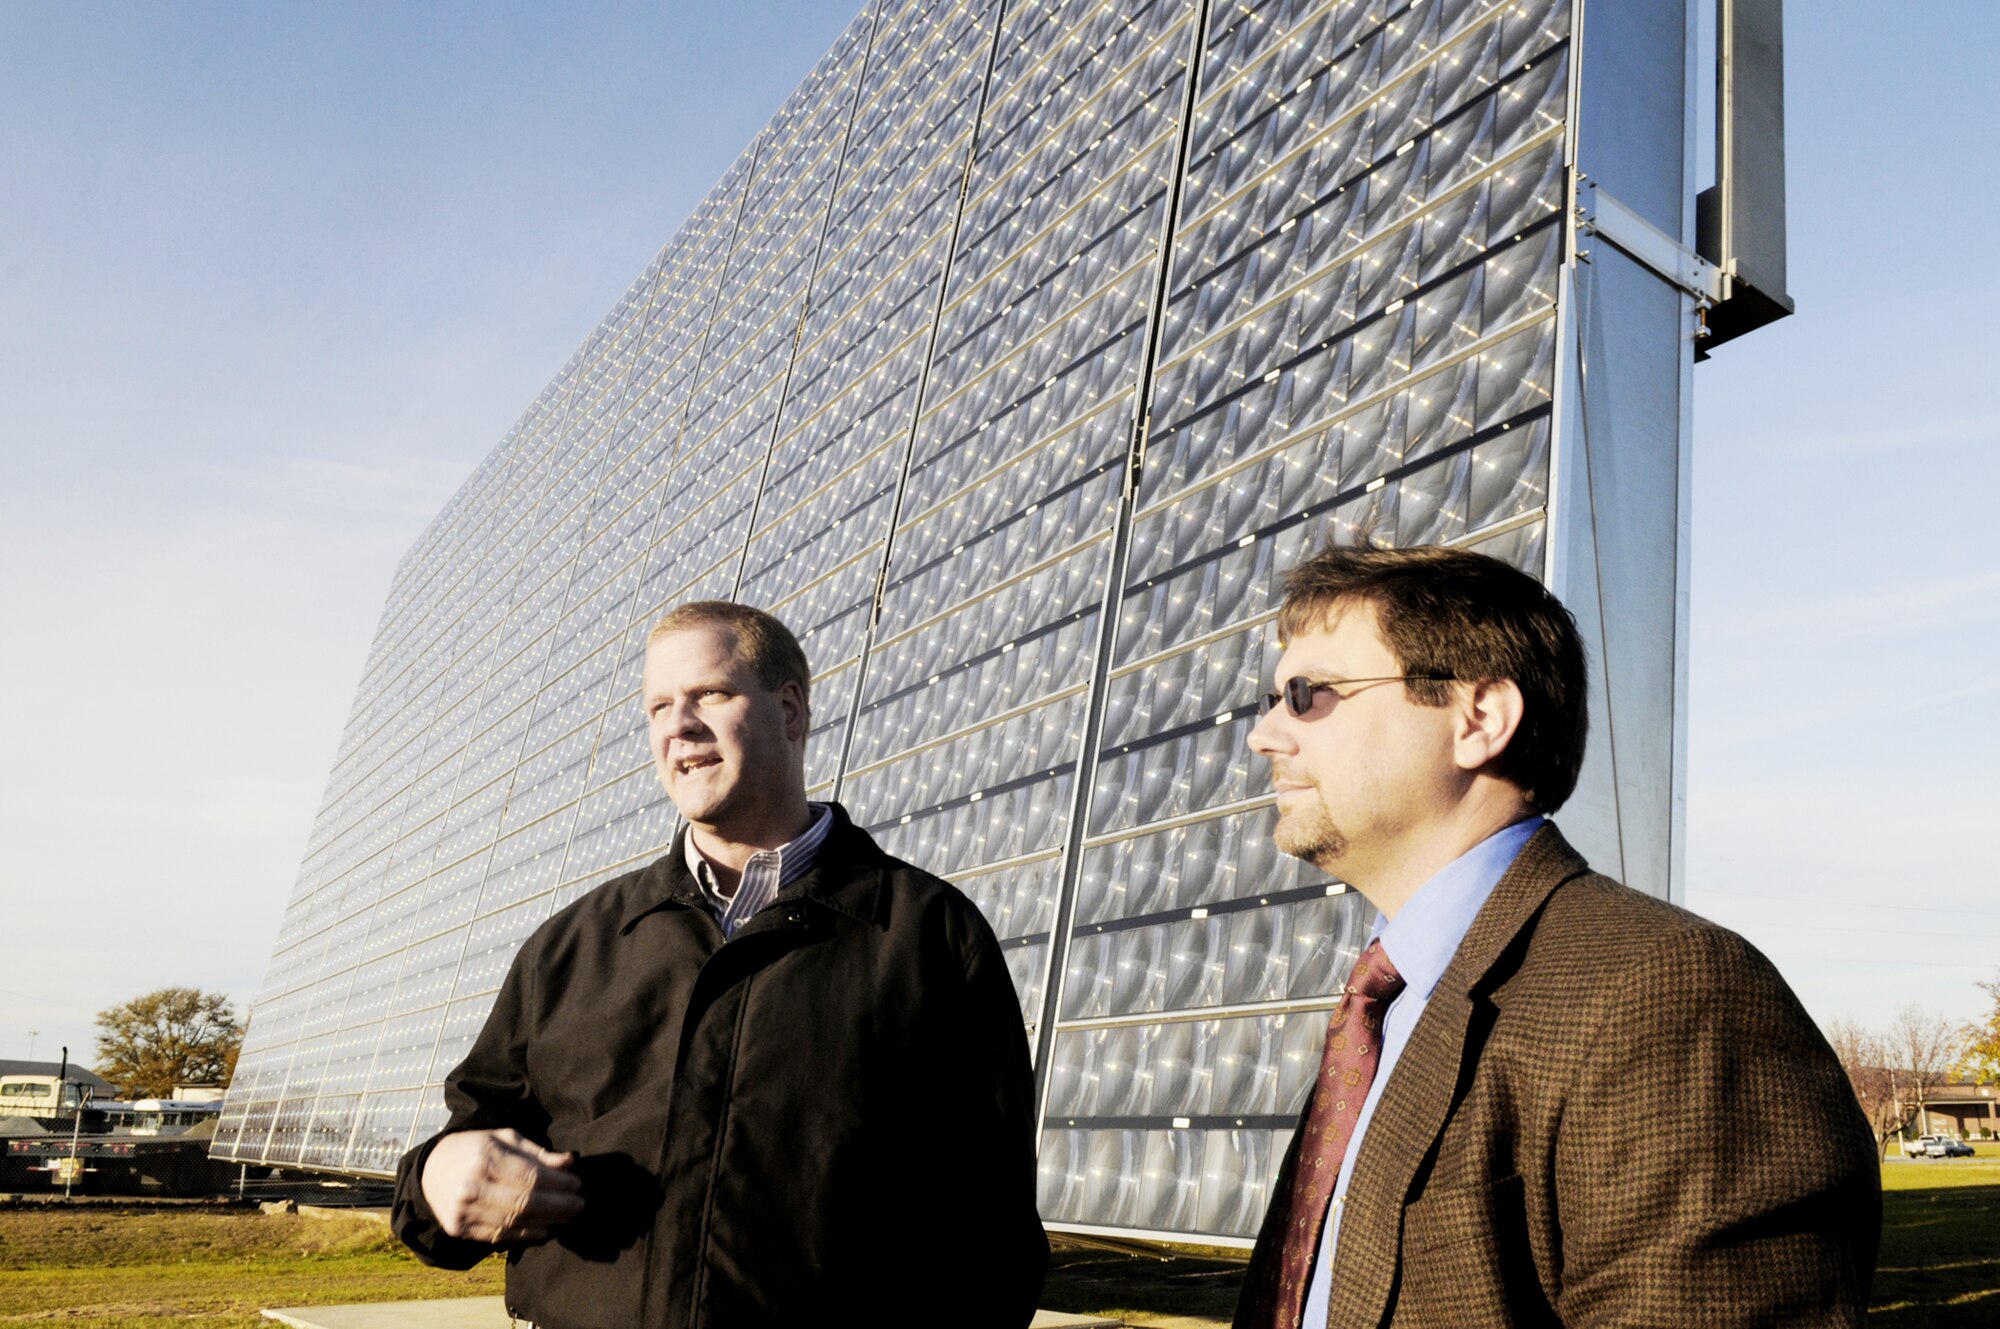 Scott Slyfield and Robert David talk about the Air Force's Advanced Power Technology Office 25kW Tracking Solar Array recently at Robins Air Force Base, Ga. Mr. David is an engineering supervisor and head of the APTO office. Mr. Slyfield is an APTO program manager. (U. S. Air Force photo/Sue Sapp)
